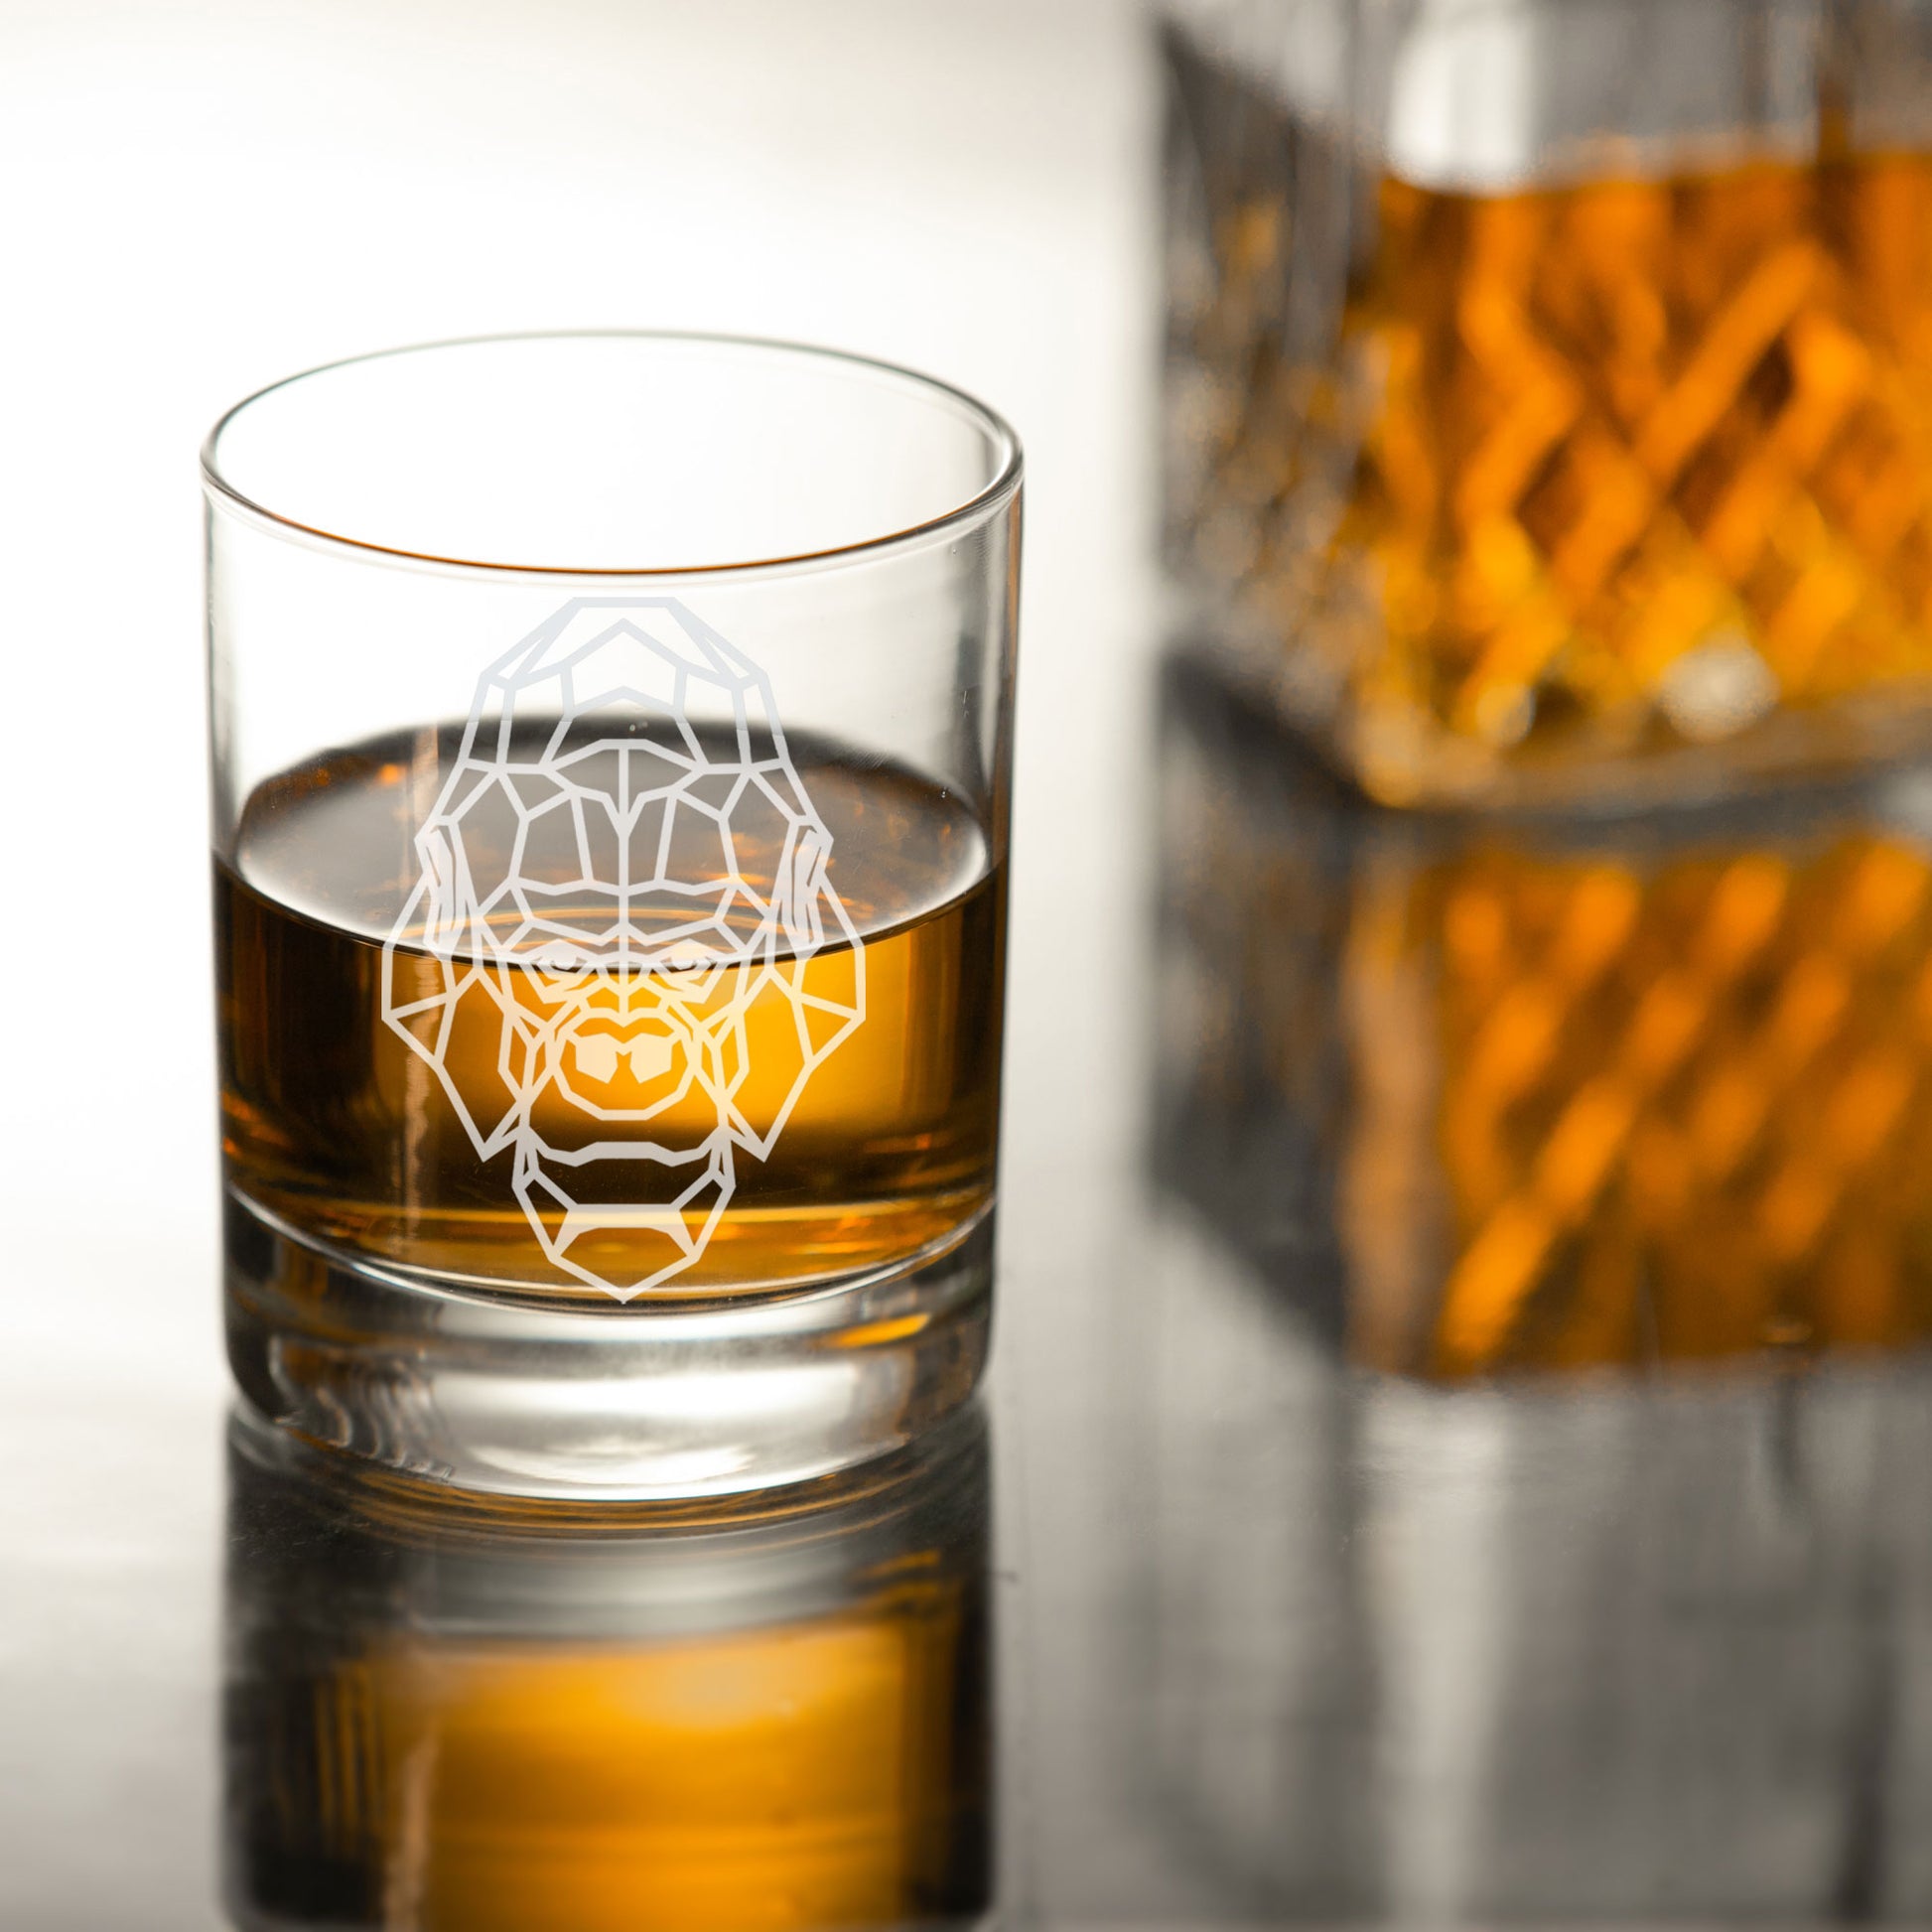 Gorilla Engraved Whisky Glass  - Always Looking Good -   